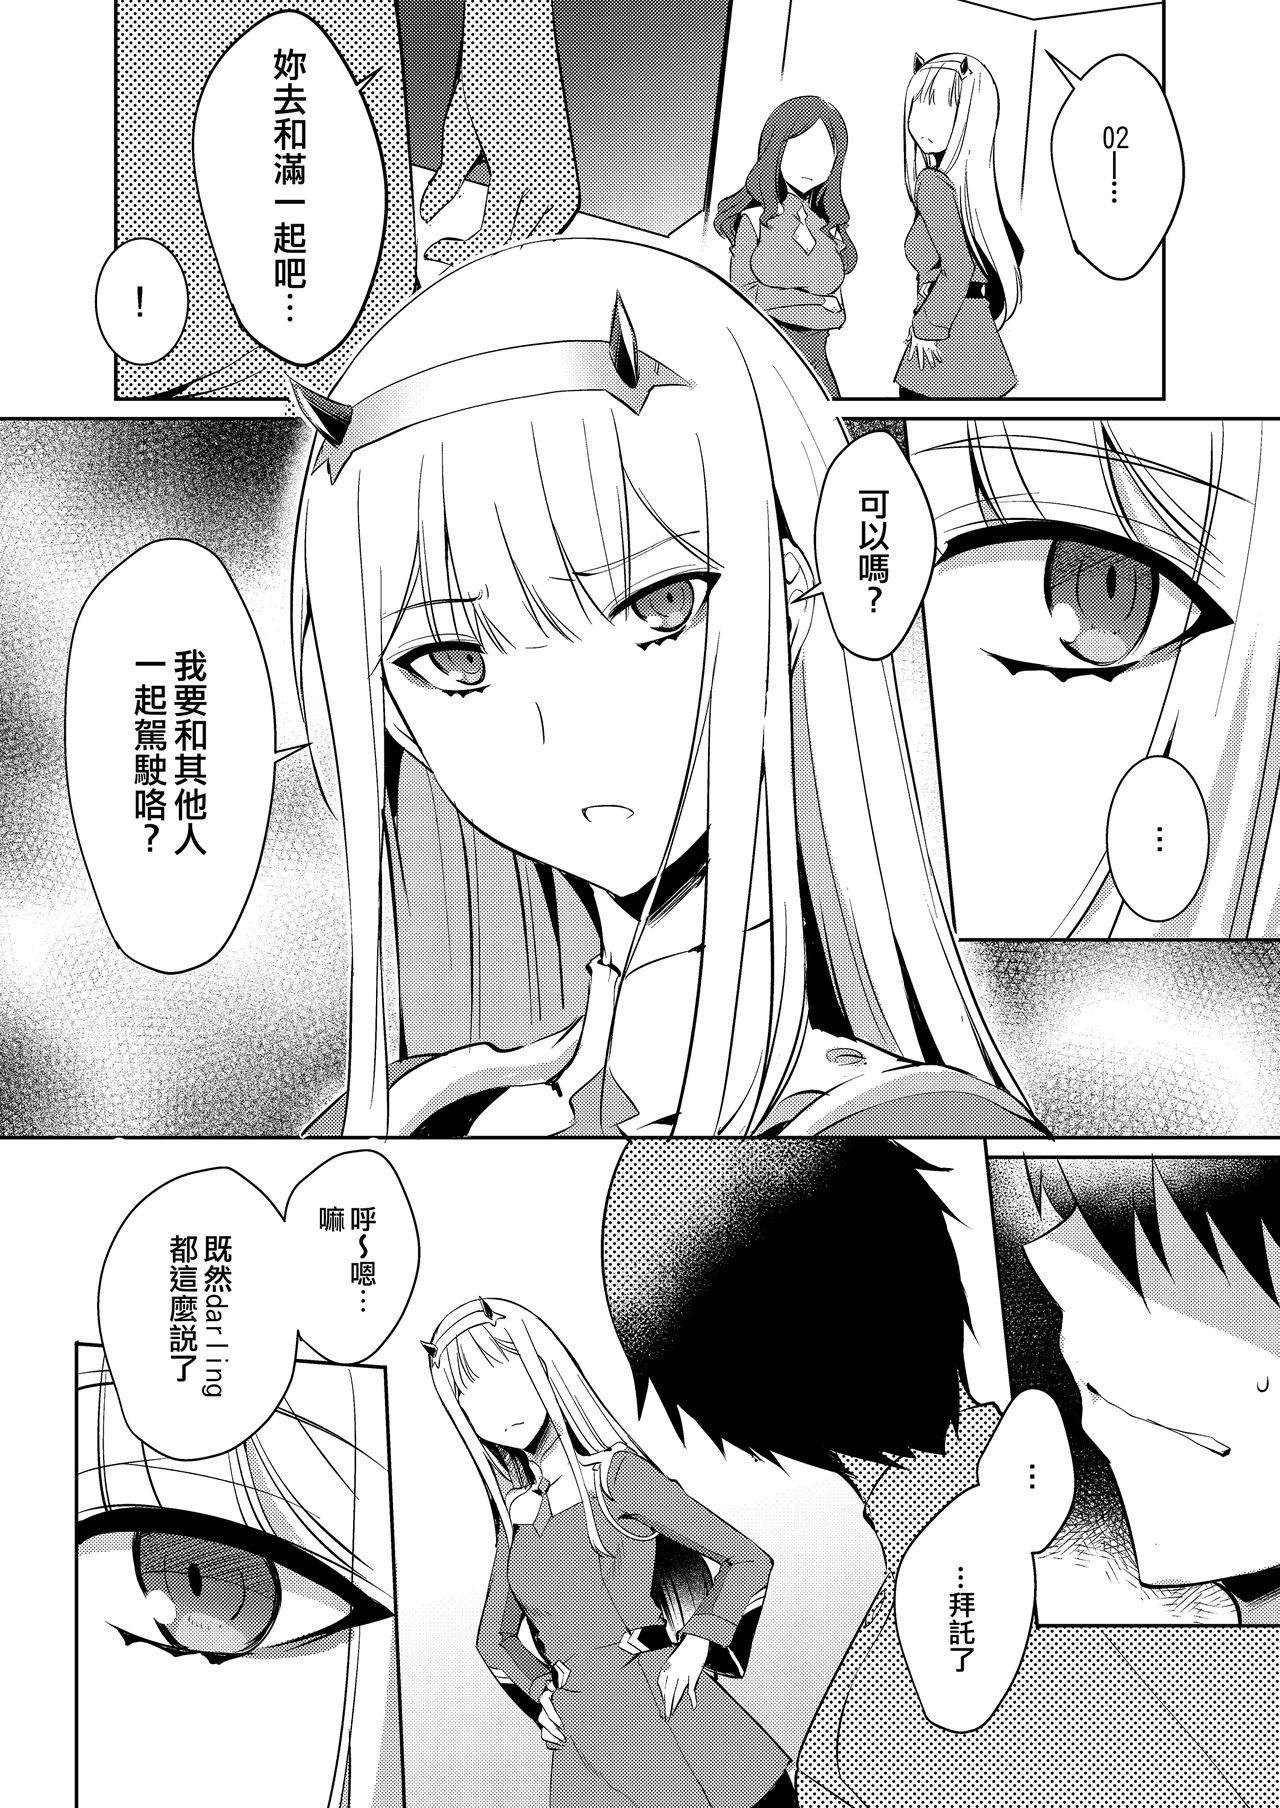 Female Domination Mitsuru in the Zero Two - Darling in the franxx Wet - Page 7